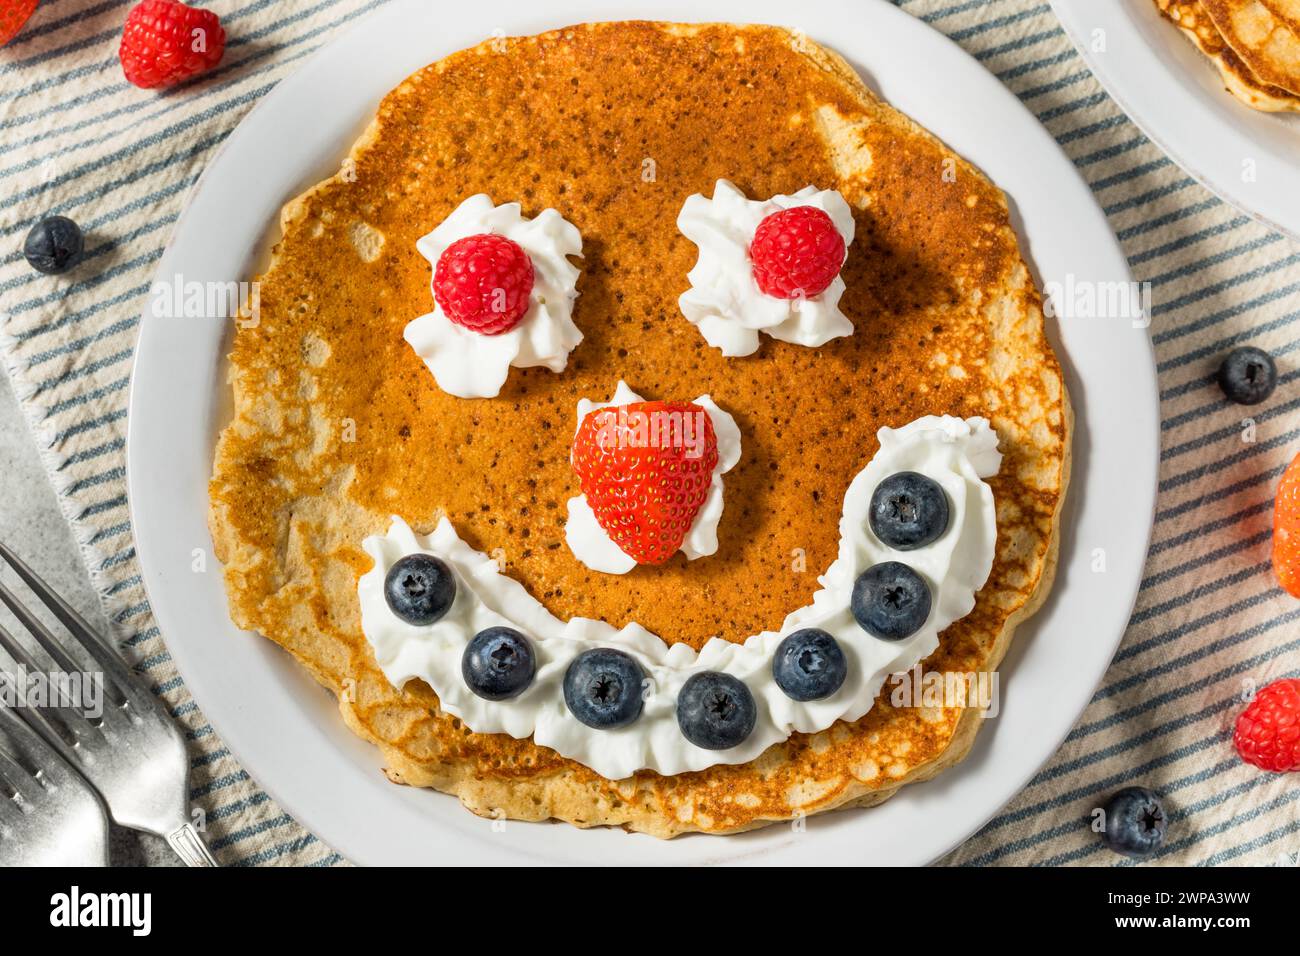 Sweet American Smiley Face Breakfast Pancakes with Whipped Cream and Berries Stock Photo